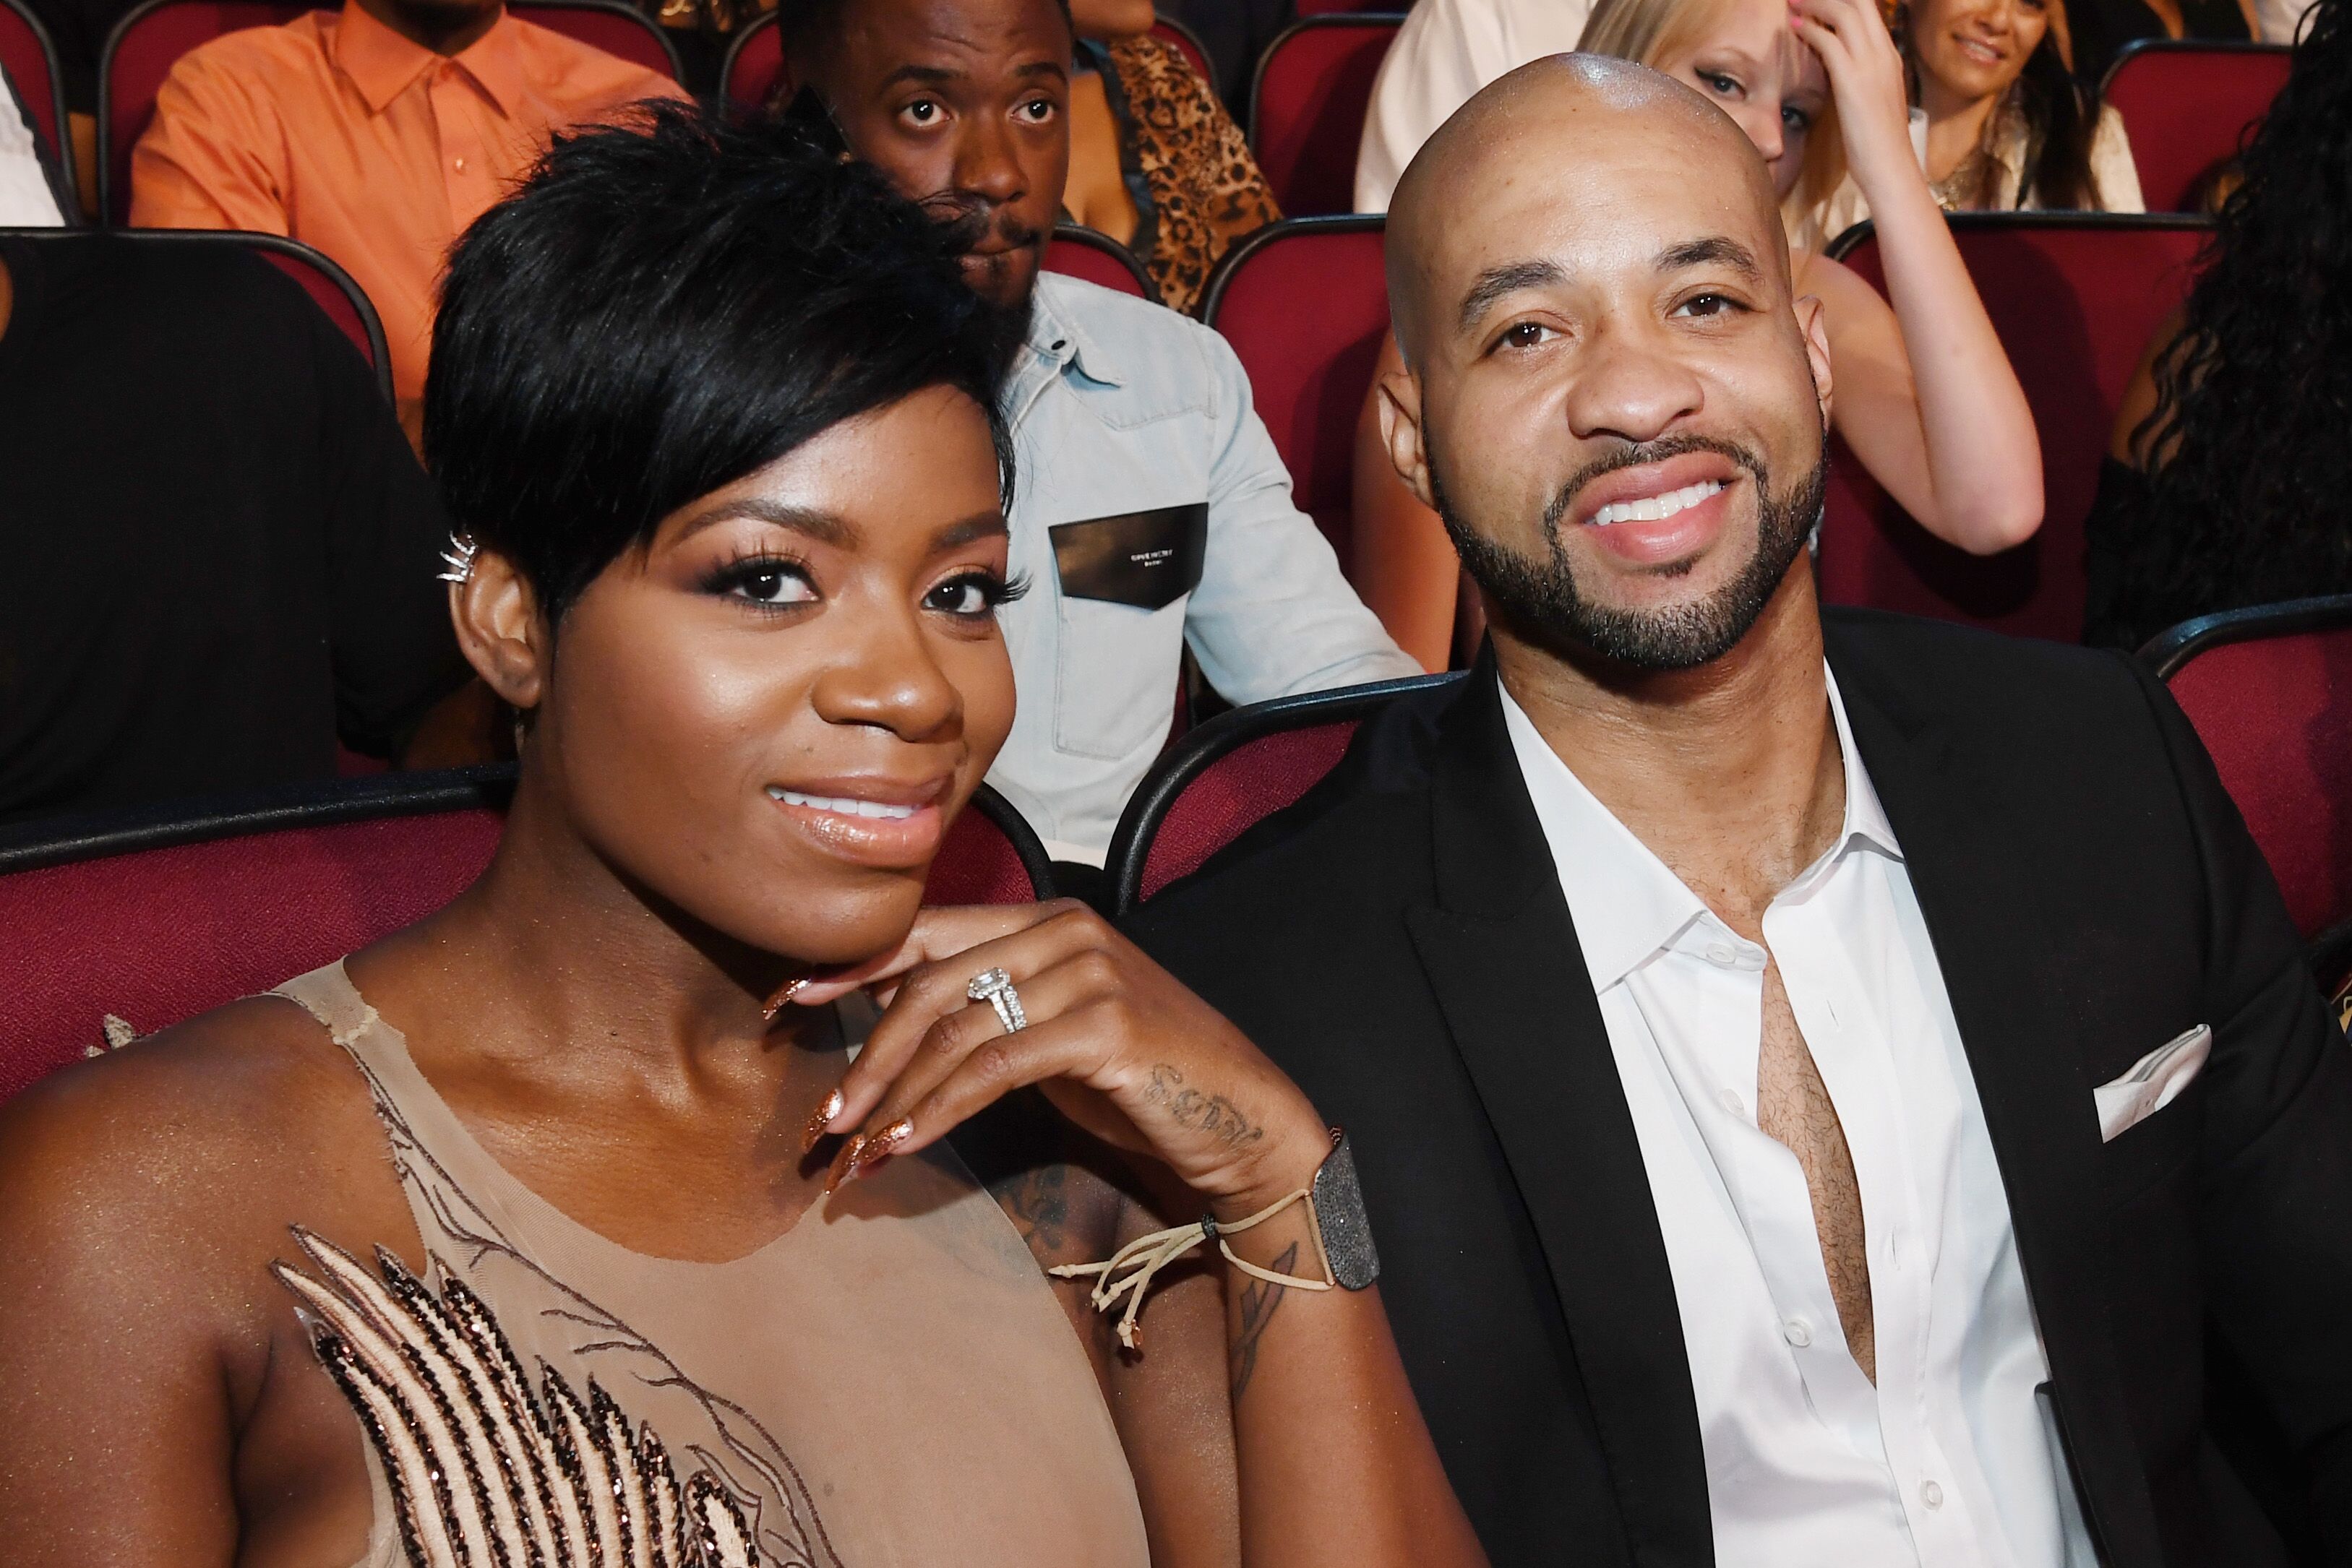 Fantasia Barrino & her husband Kendall Taylor at the BET Awards in 2016 in California | Source: Getty Images